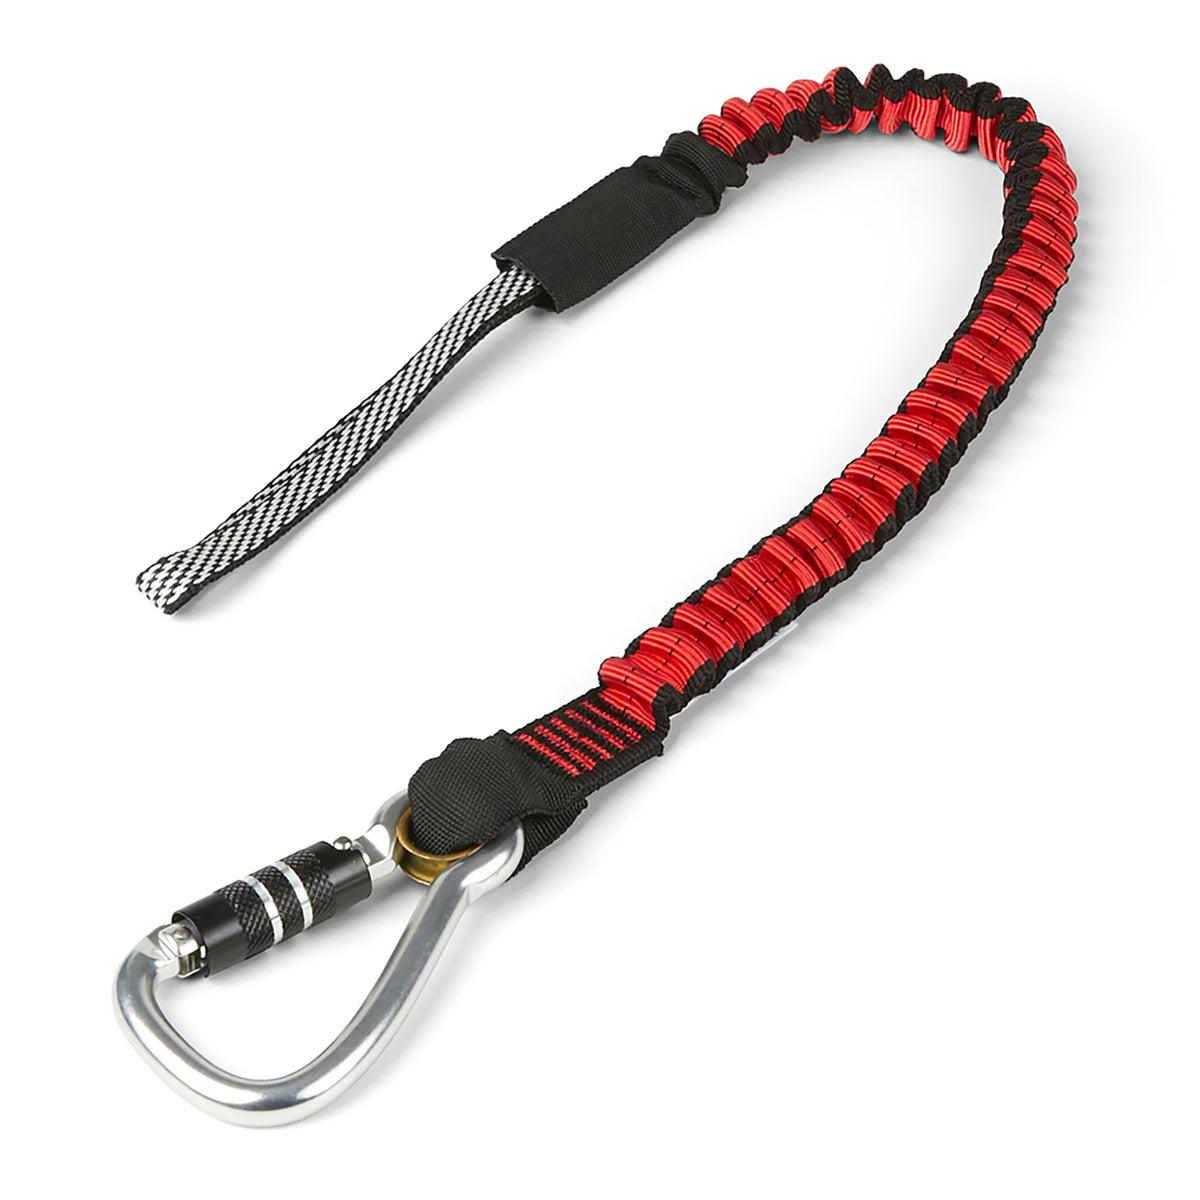 Bungee Heavy-Duty Tether Dual-Action - 40 lb